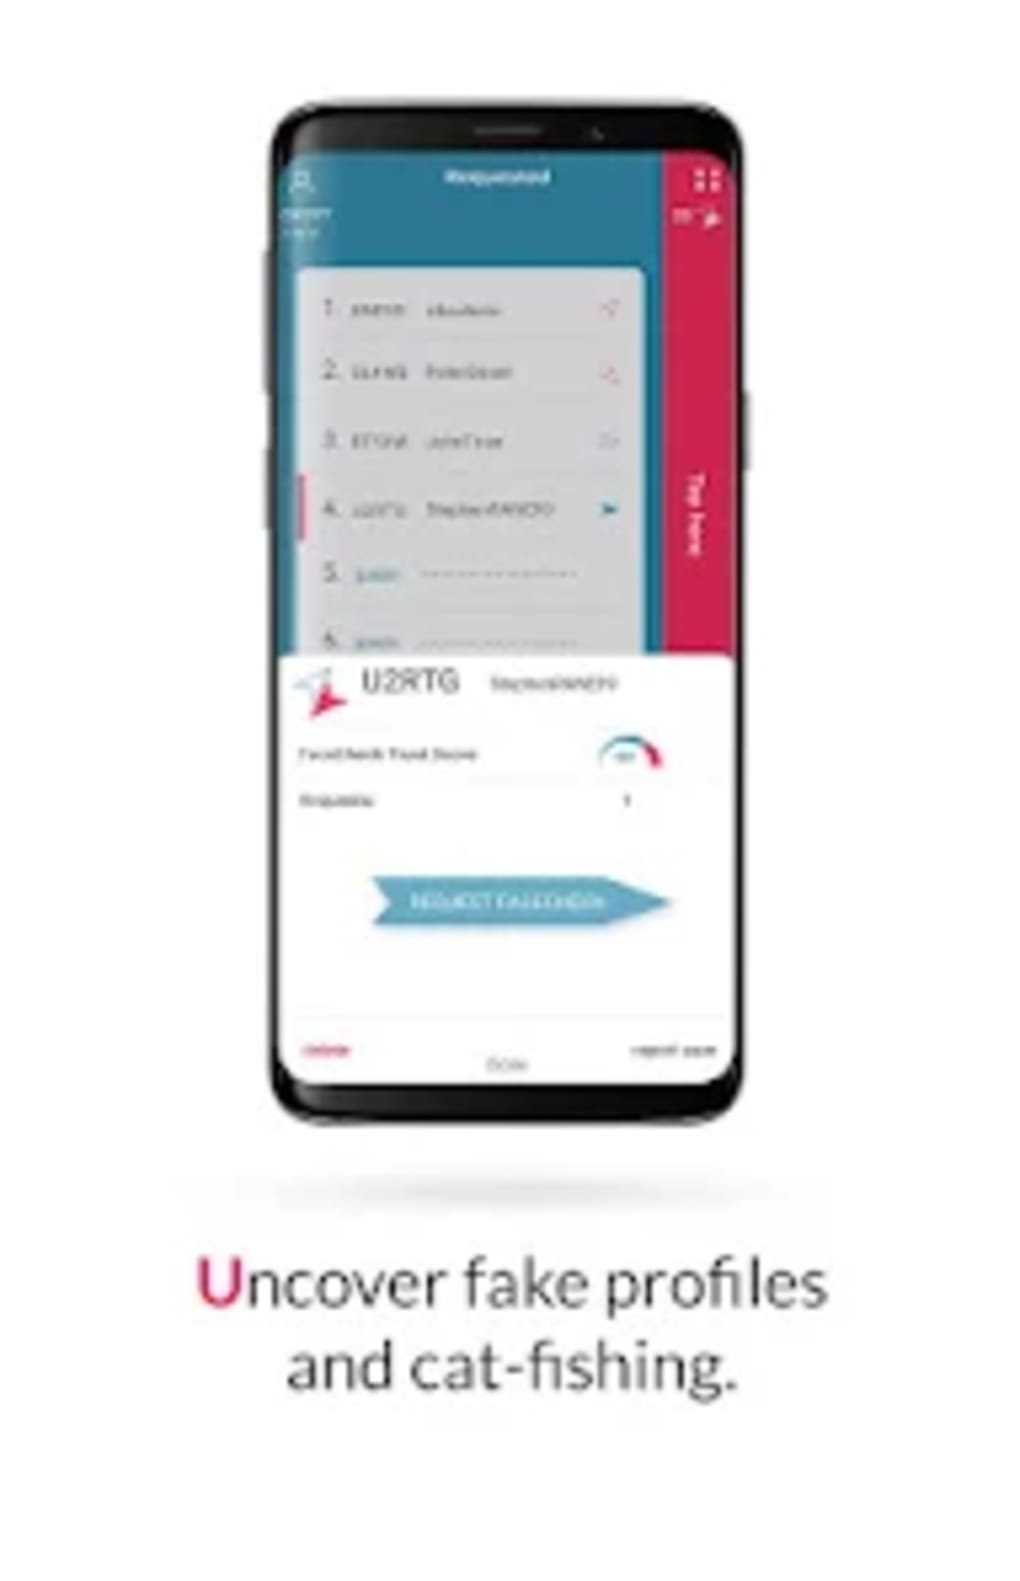 About: FaceCheck ID (iOS App Store version)